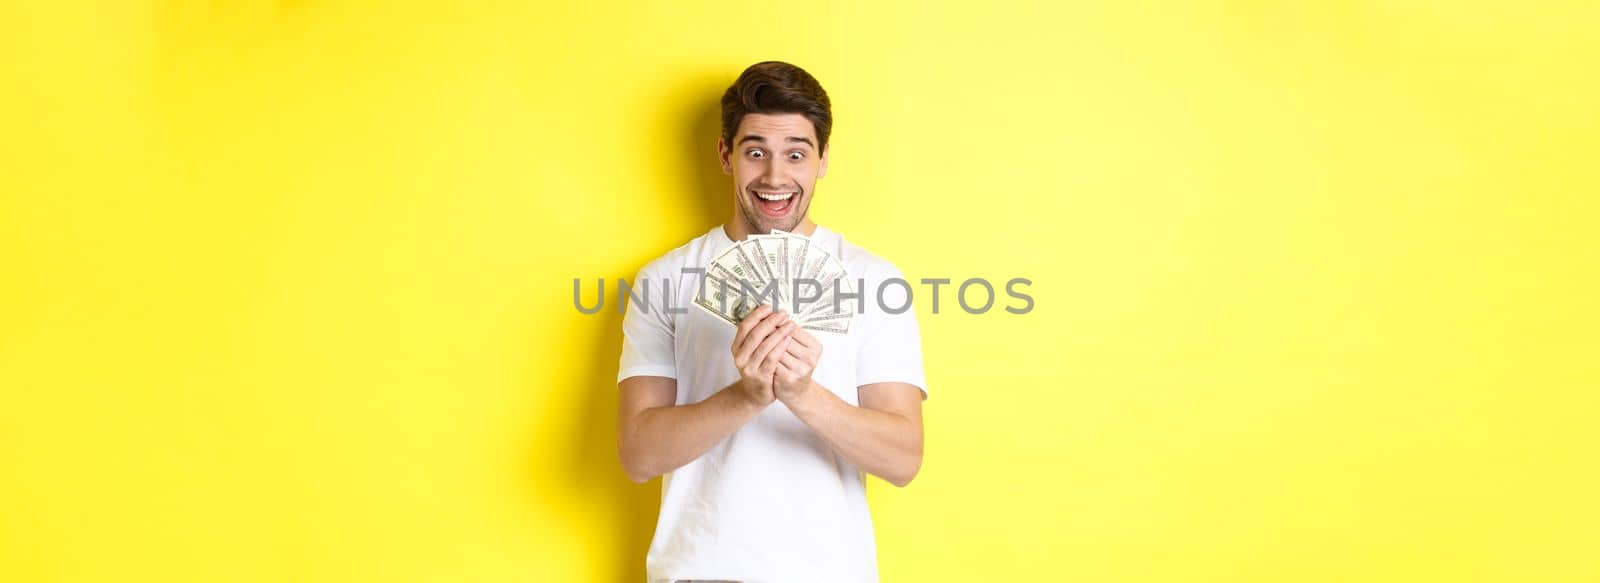 Happy man looking at money and smiling excited, winning prize, got bank loan, standing over yellow background.